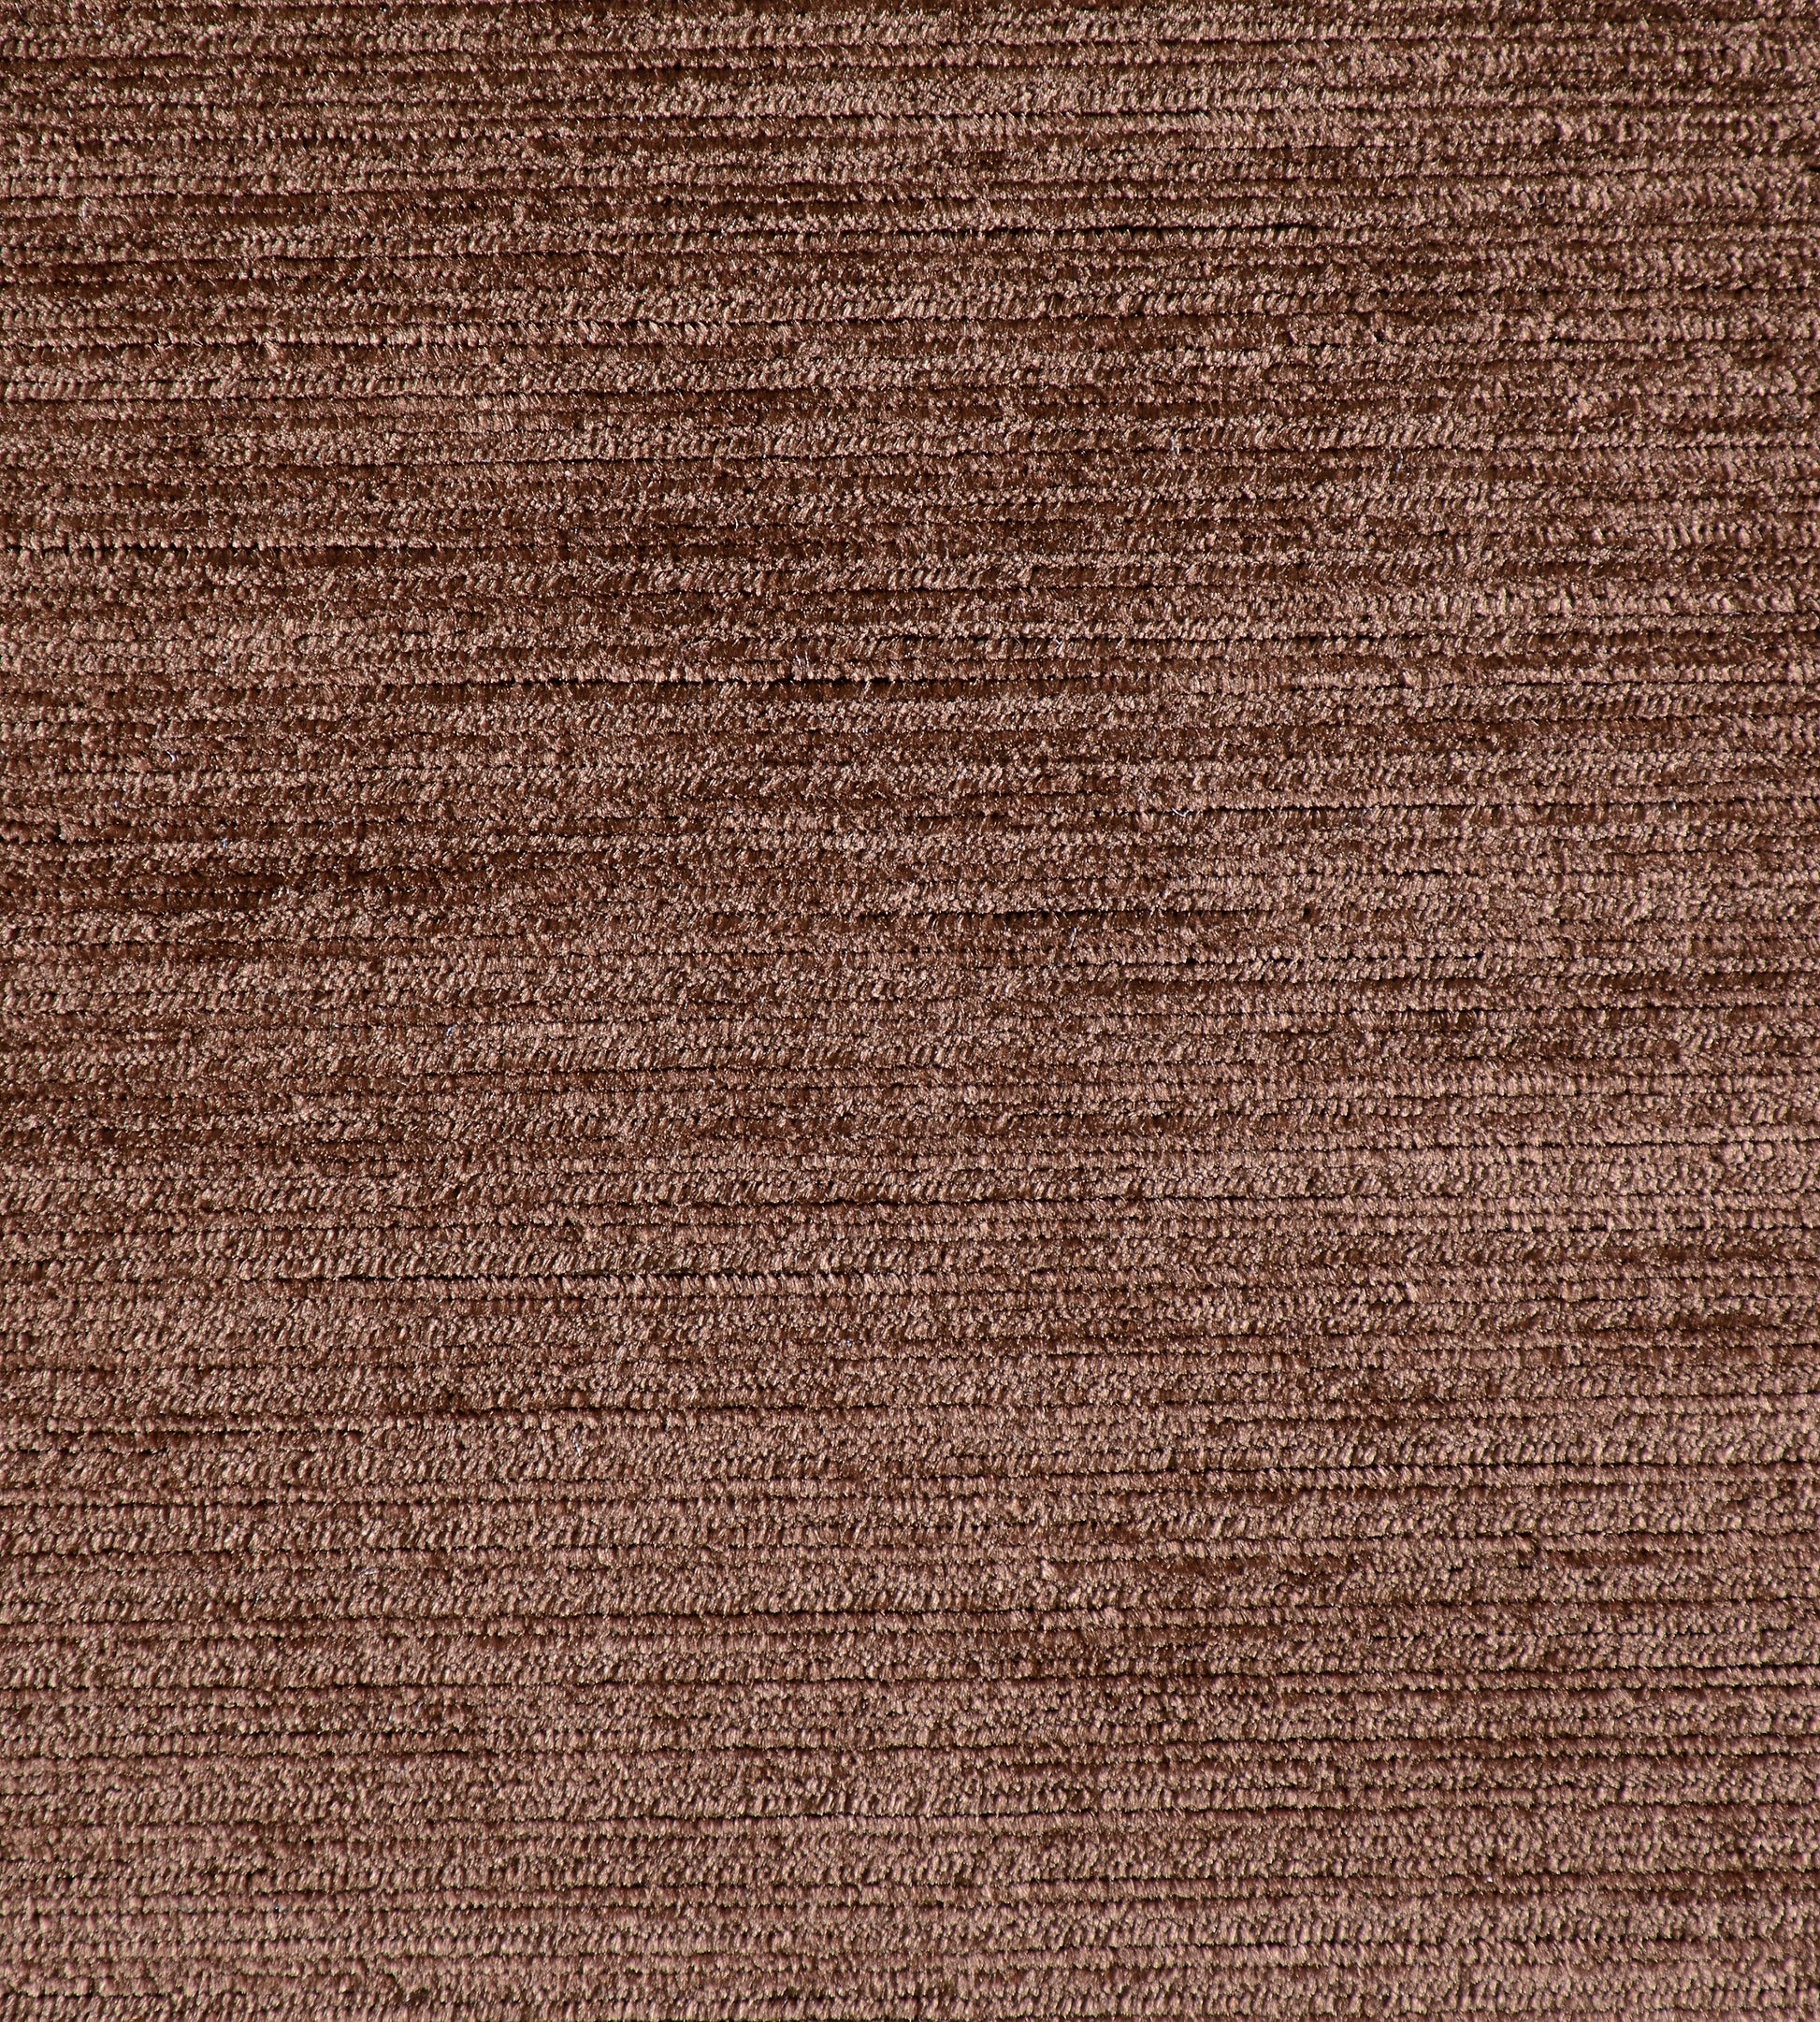 Purchase Old World Weavers Fabric Product VP 0565NOBE, Nobel Coffee Bean 1